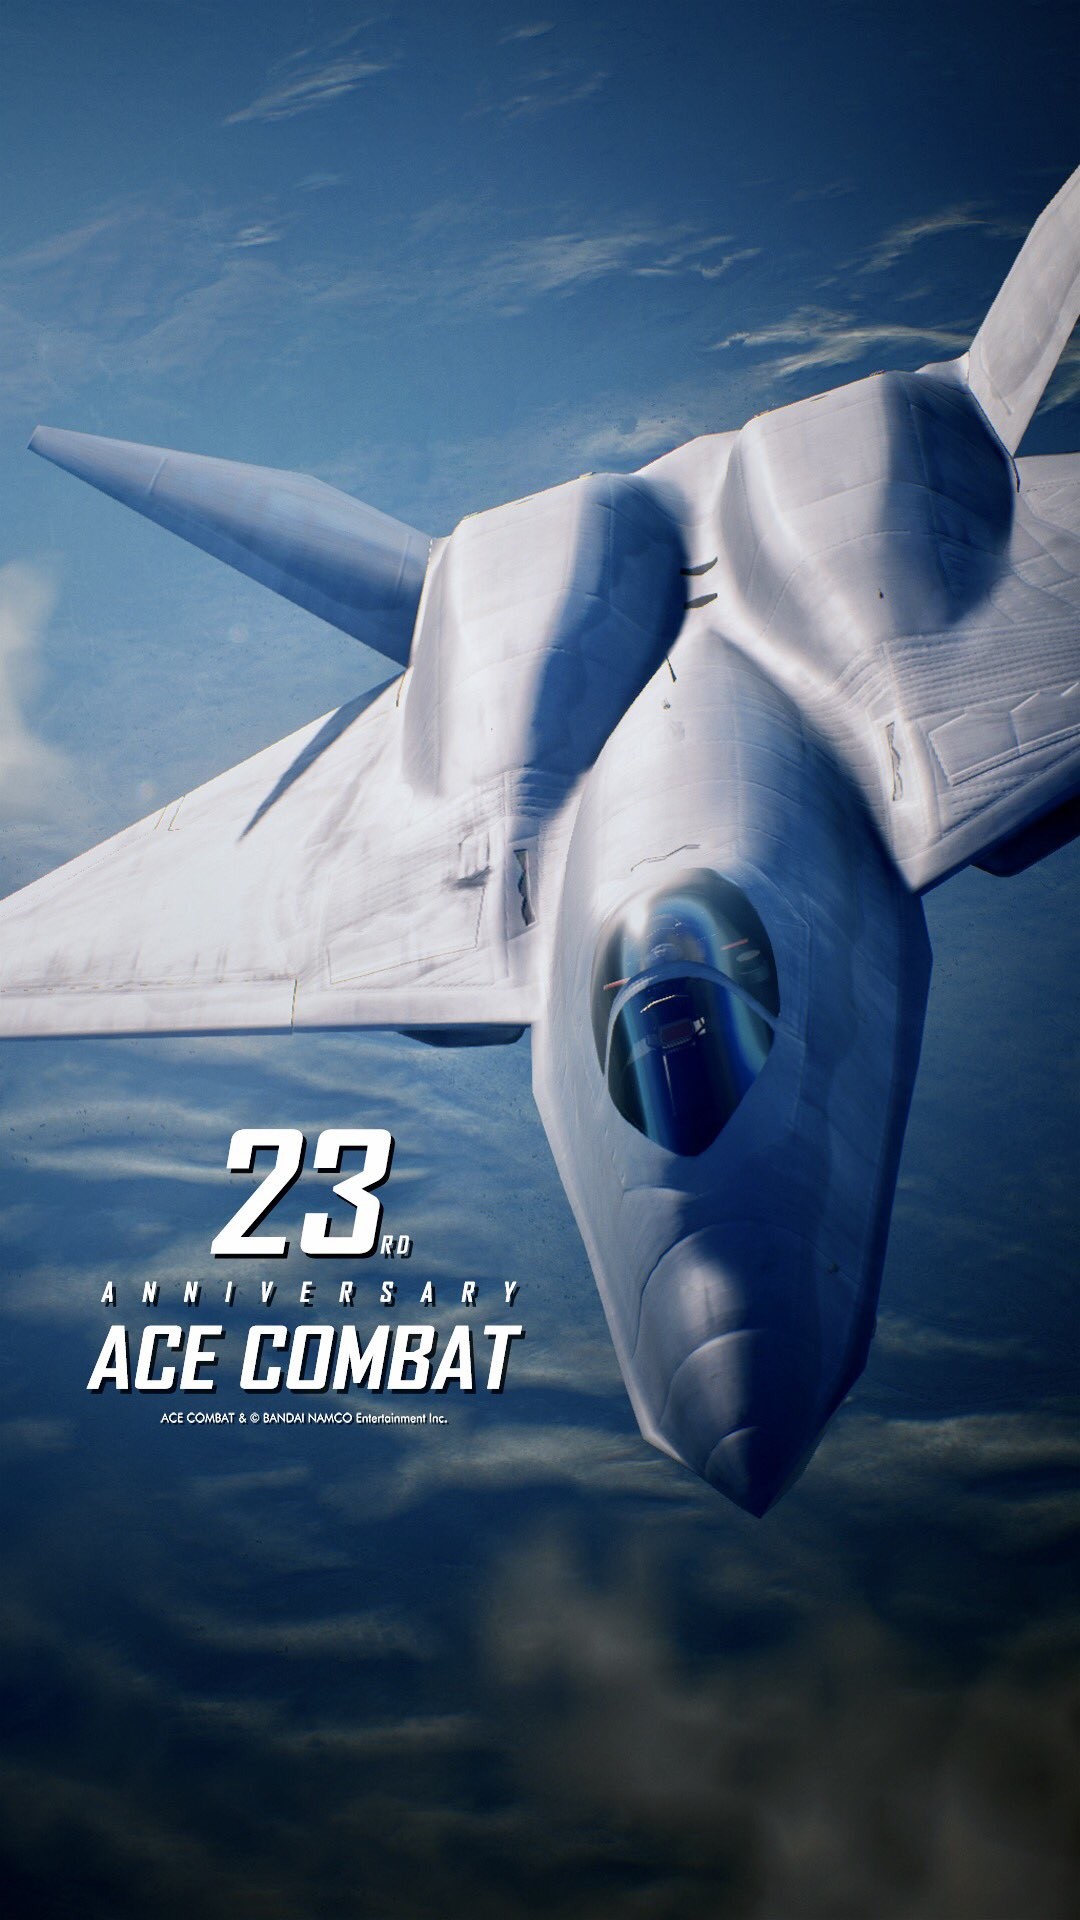 1080x1920 Ace Combat's 23rd anniversary mobile wallpaper. "